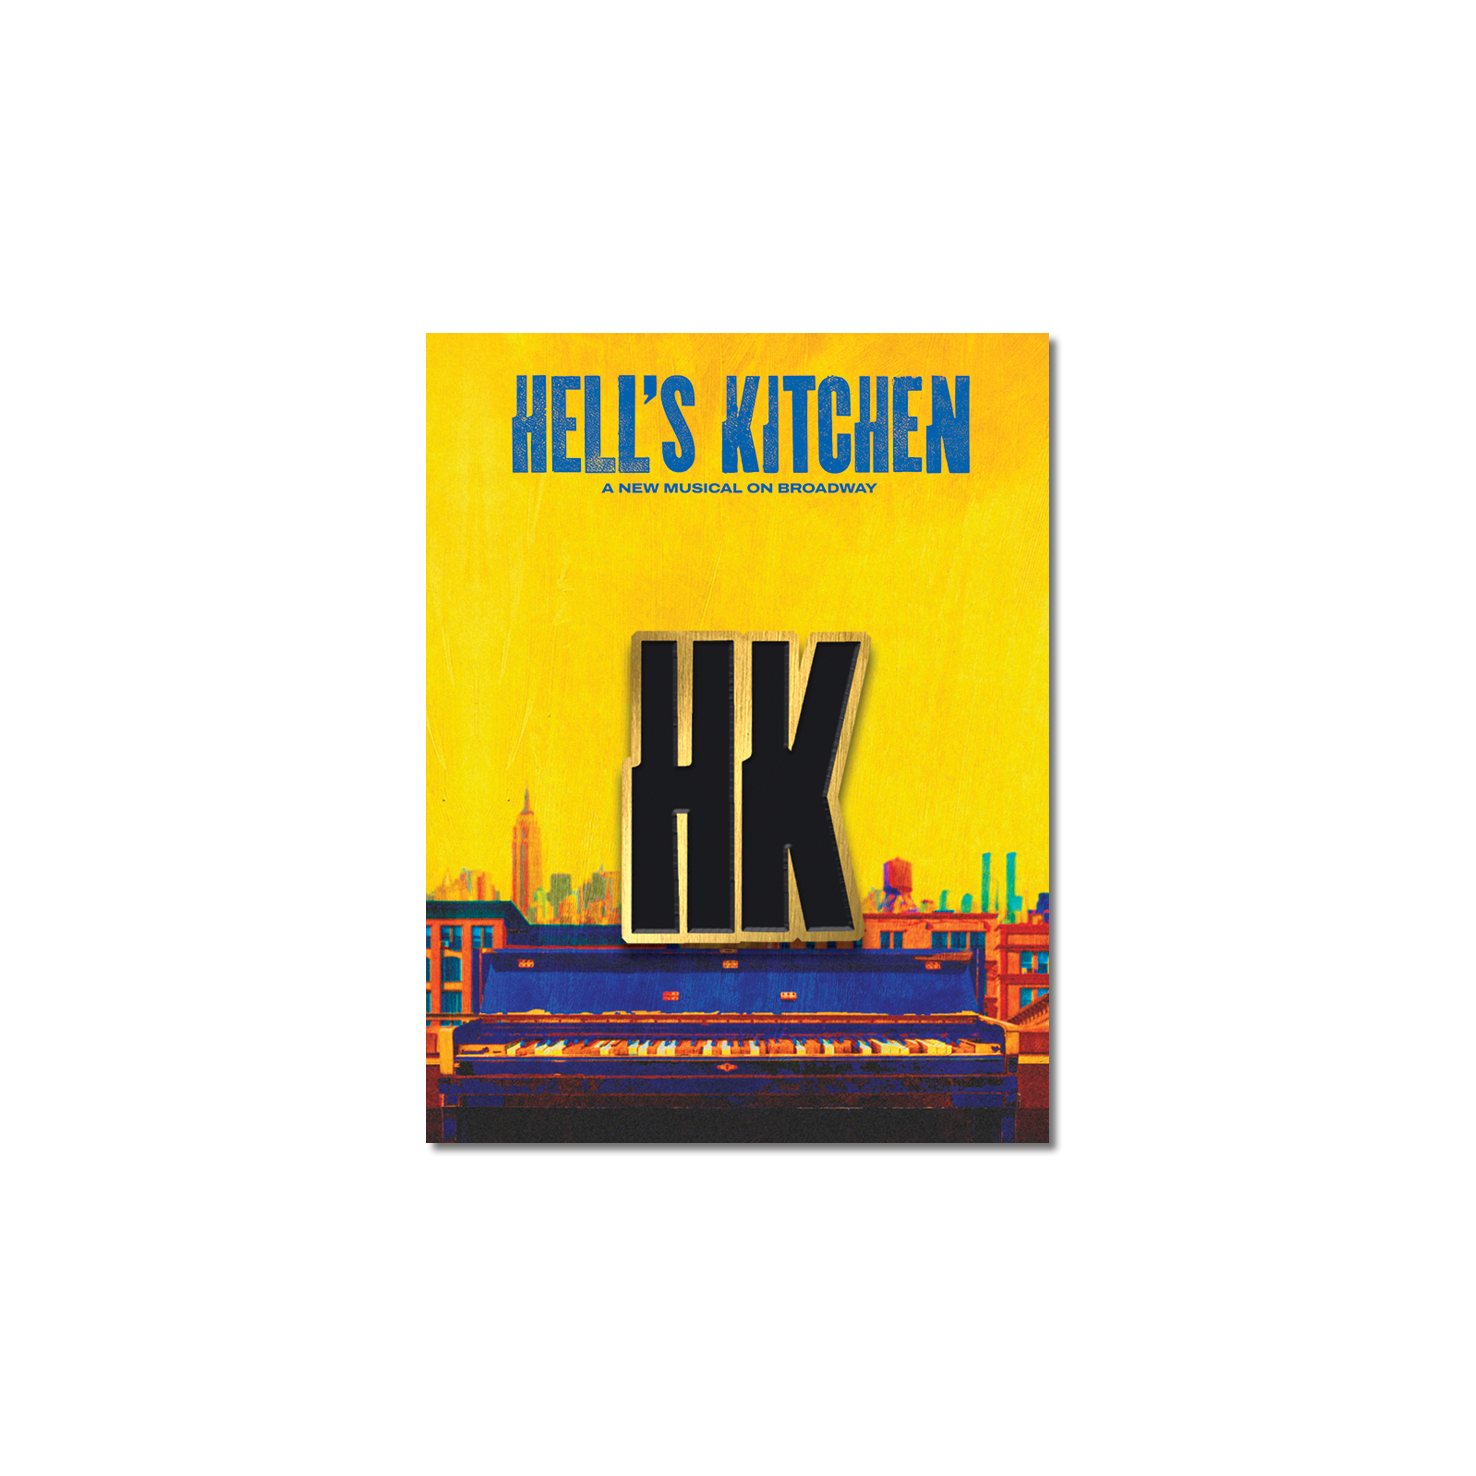 HELL'S KITCHEN Lapel Pin Image